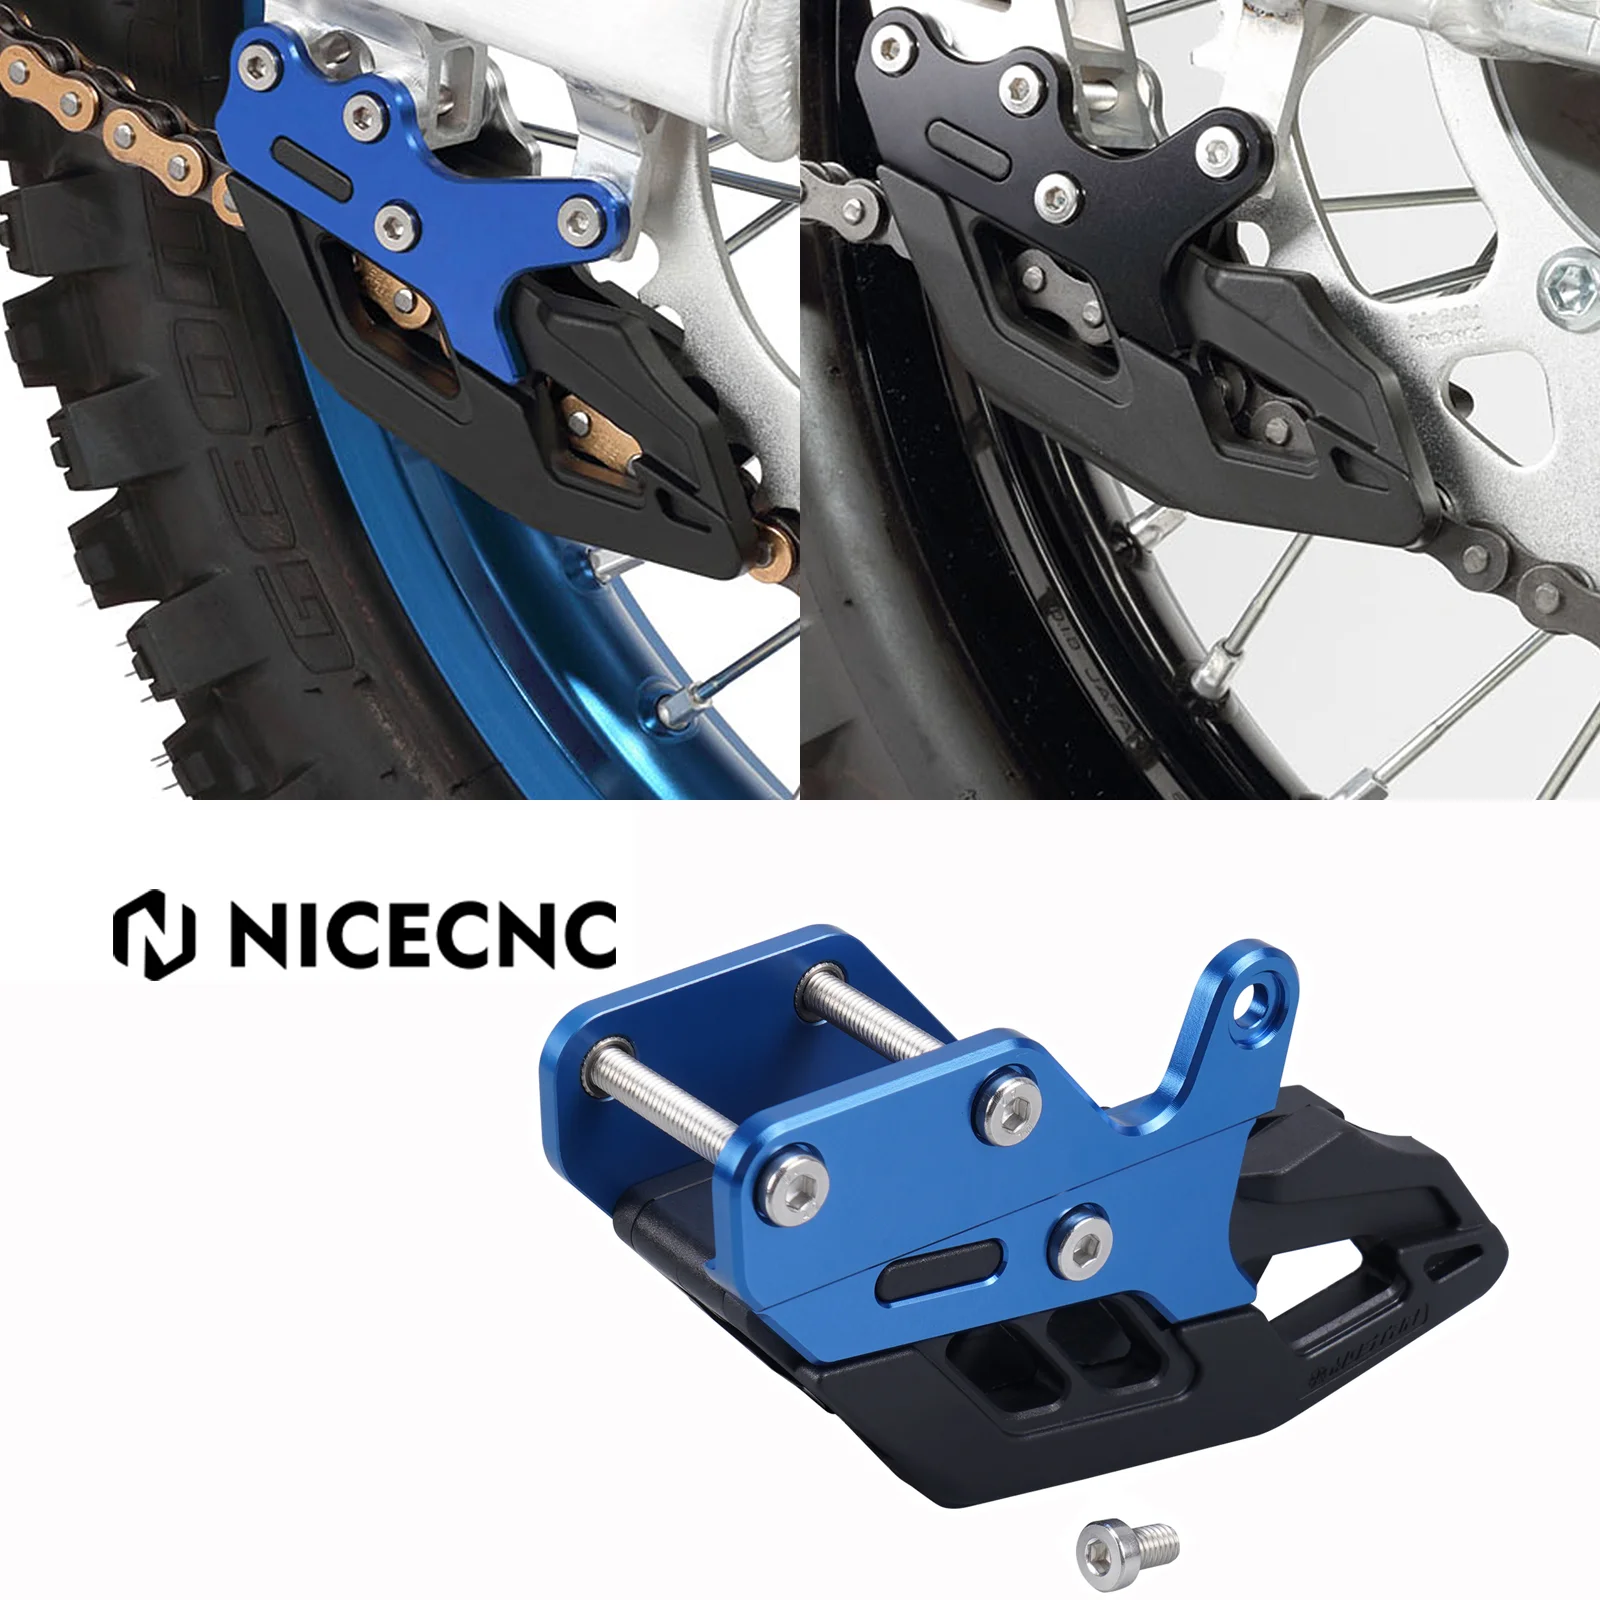 

NICECNC Motorcycle Chain Guide Guard Protector For Yamaha WR250R WR250X WR 250R 250X 250 R X 2007-2021 2020 Cover Accessories